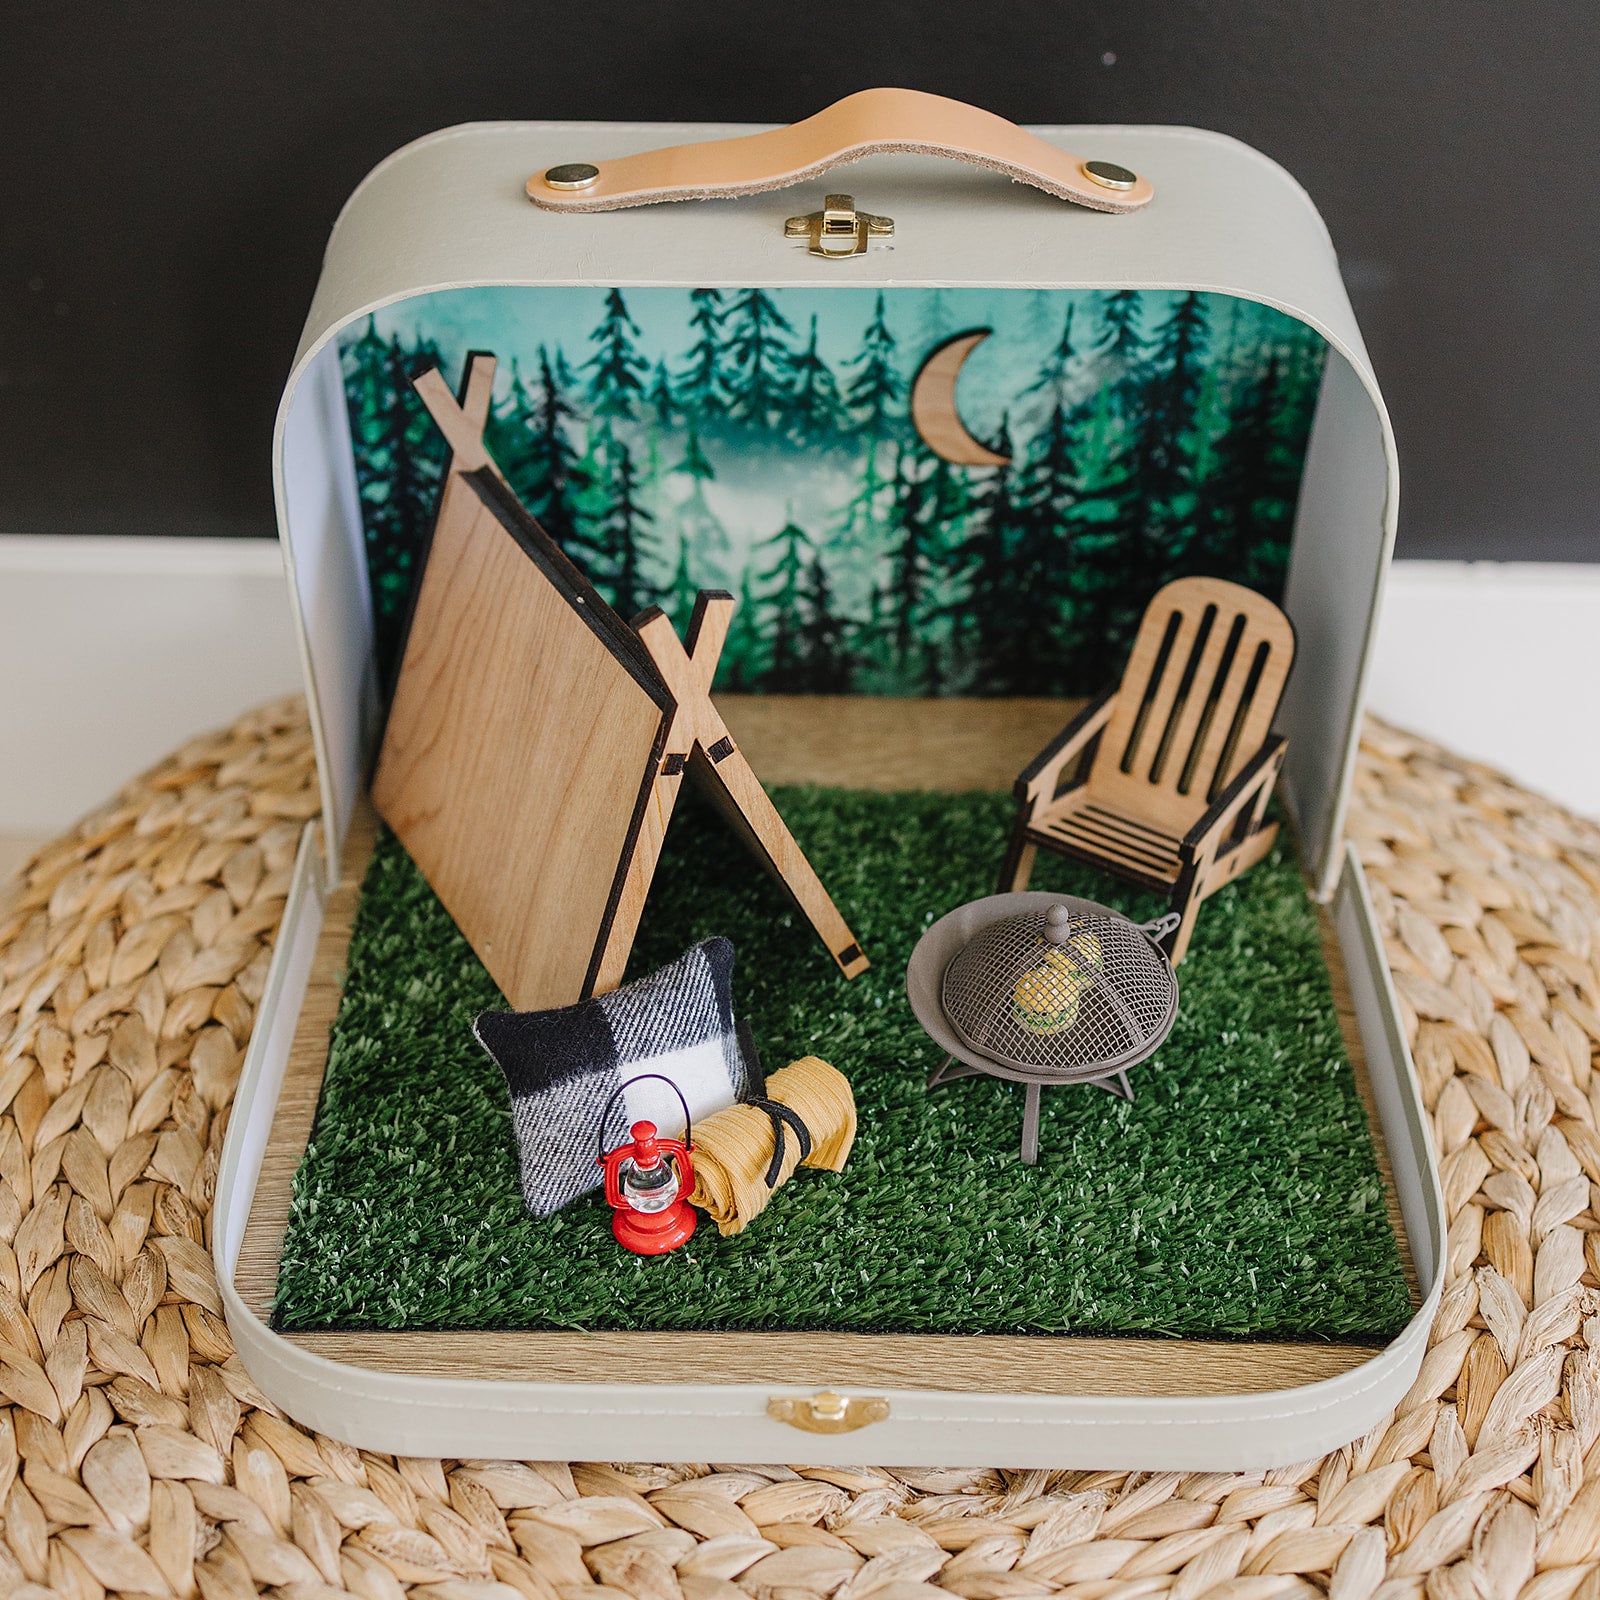 THE WASATCH - CAMPING THEMED SCENE